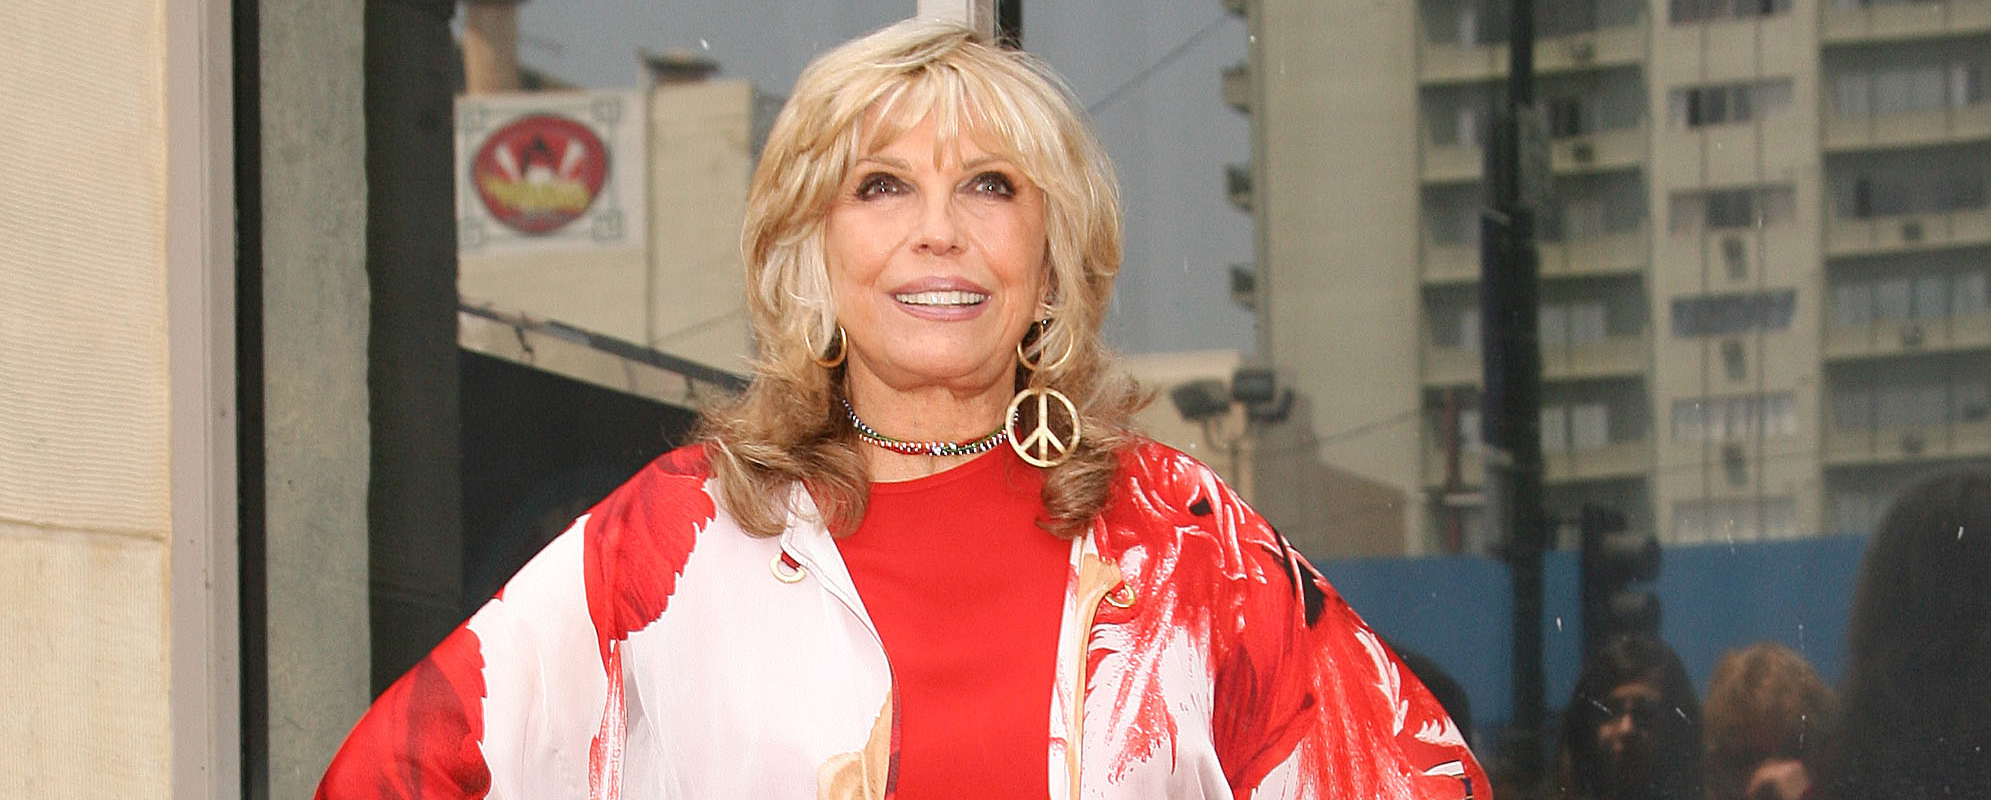 Nancy Sinatra Praises Beyoncé for ‘Cowboy Carter’ Inclusion: “This May Be the Best Sample of ‘Boots’ Yet!”